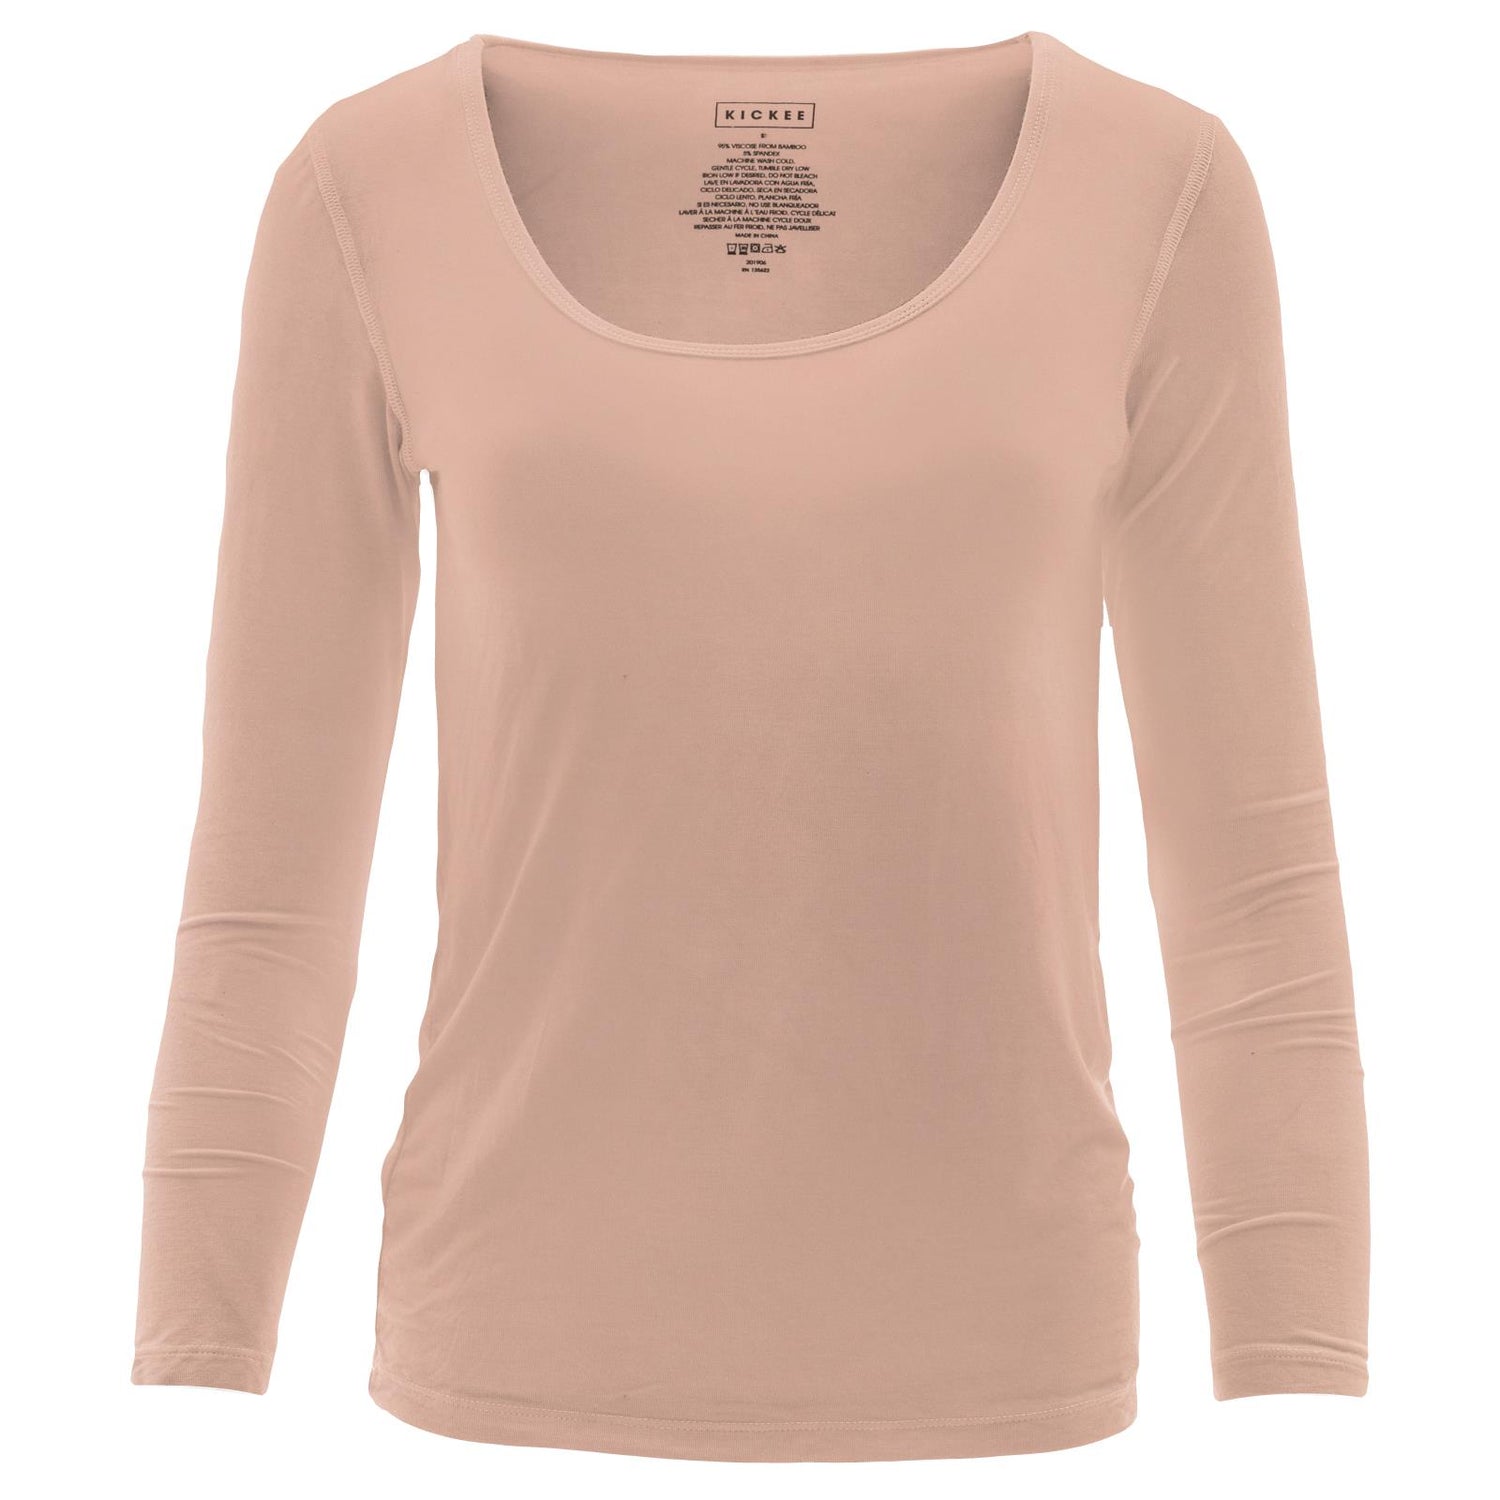 Women's Solid Long Sleeve Scoop Neck Tee in Peach Blossom